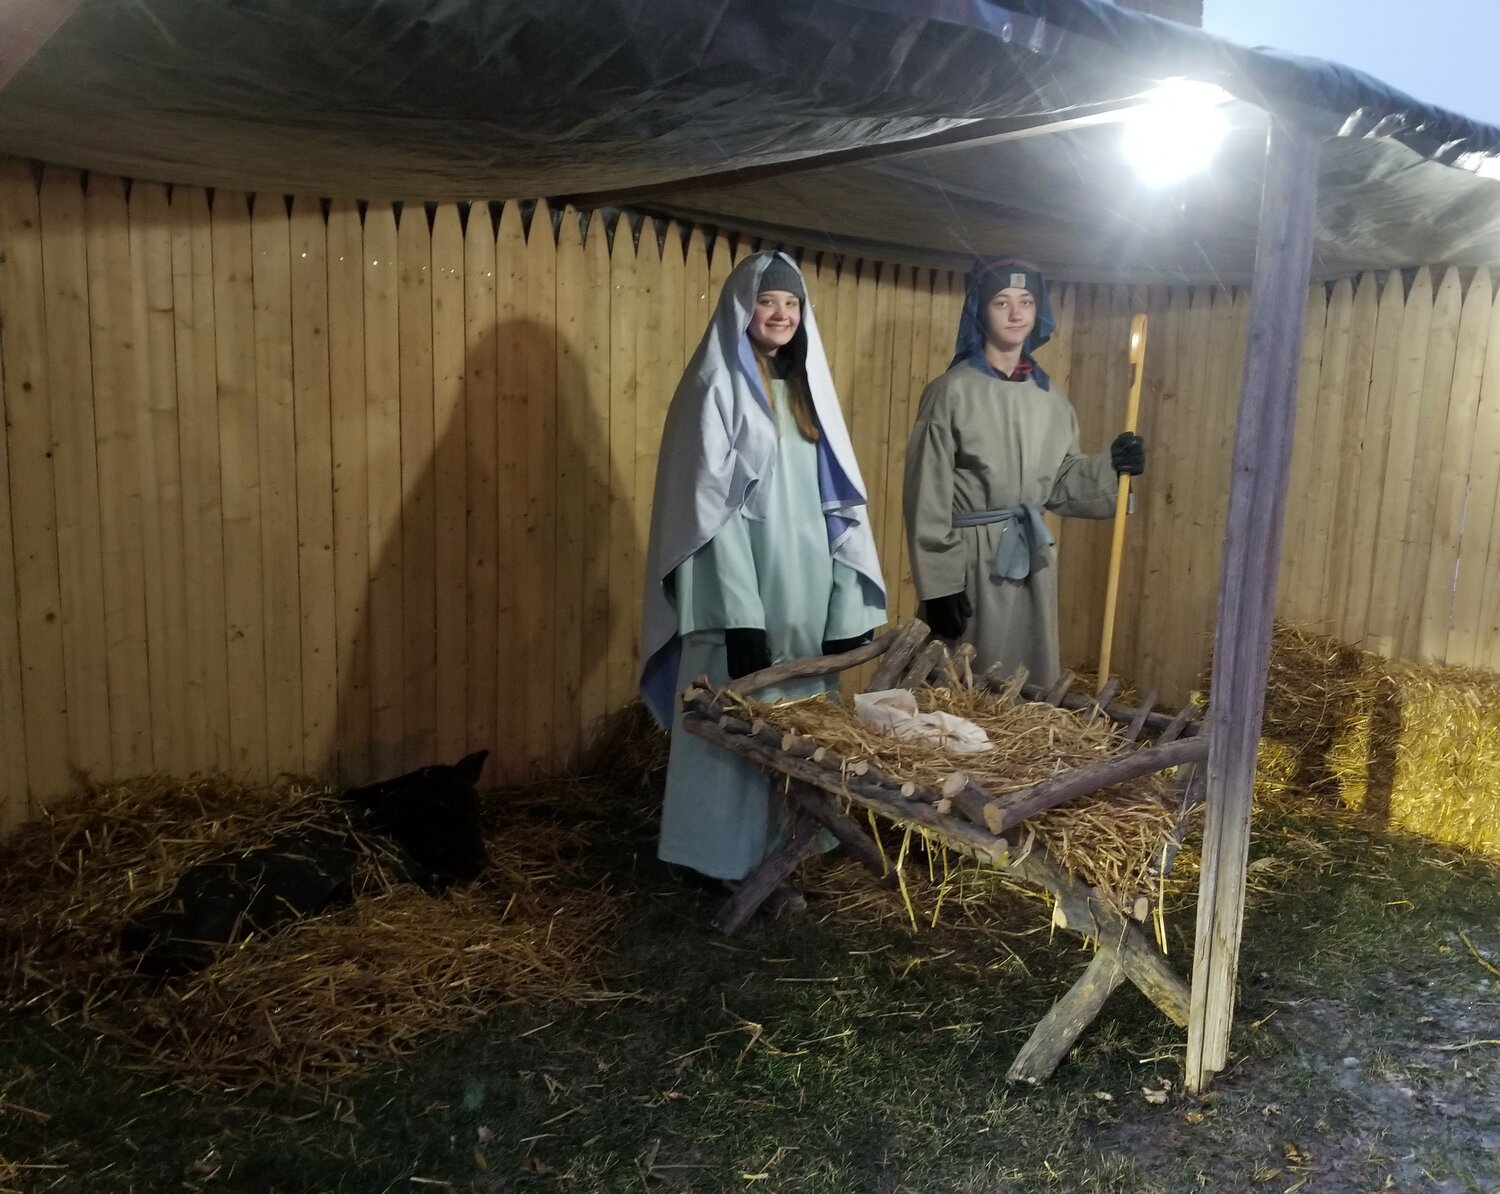 A calf nestles in the straw next to Kelsey Holst and Tyler Holst who depicted Mary and Joseph in the stable.